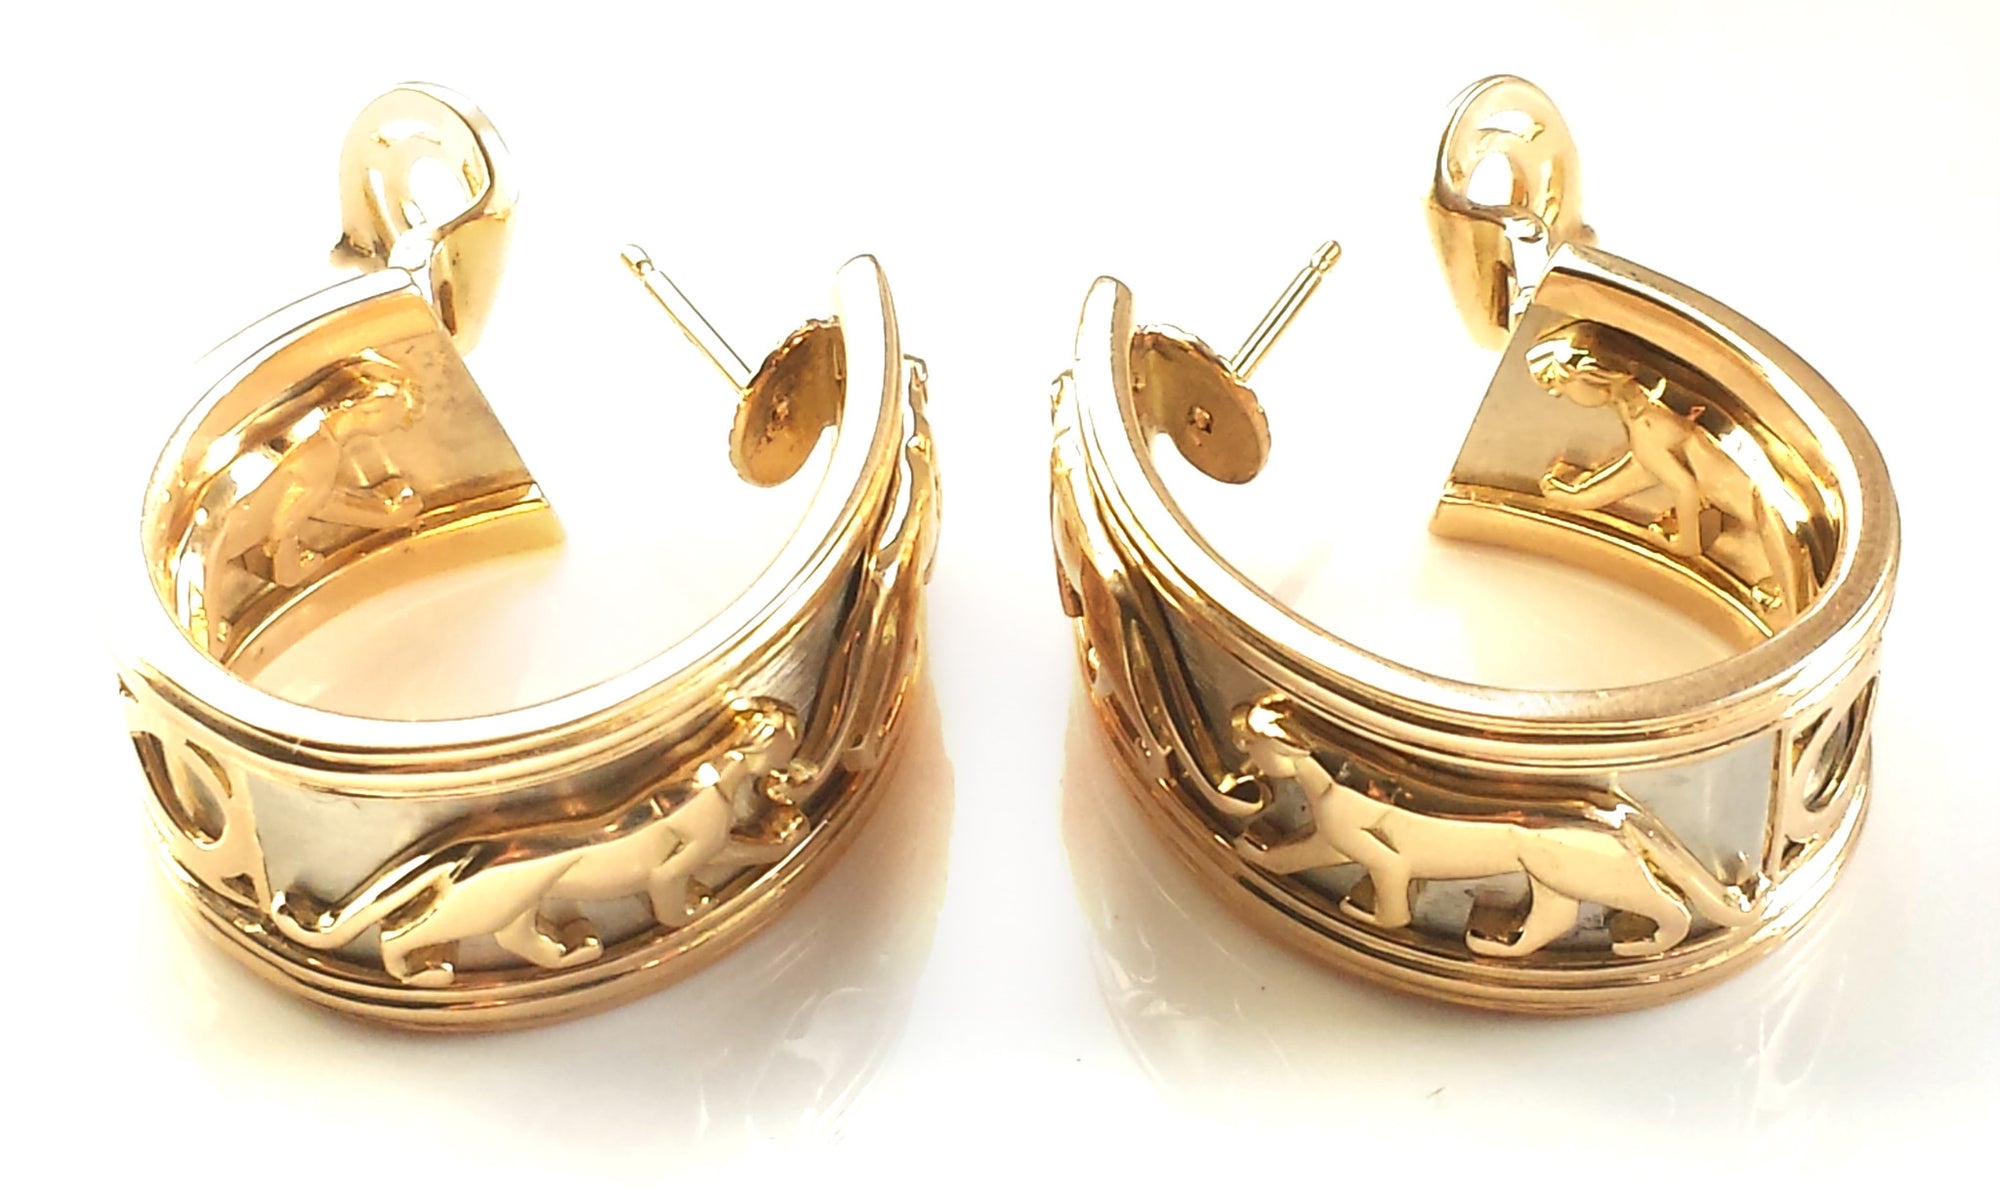 Vintage 1991 Cartier 'Pharaon' Panthere Earrings in 18k Yellow Gold, Large